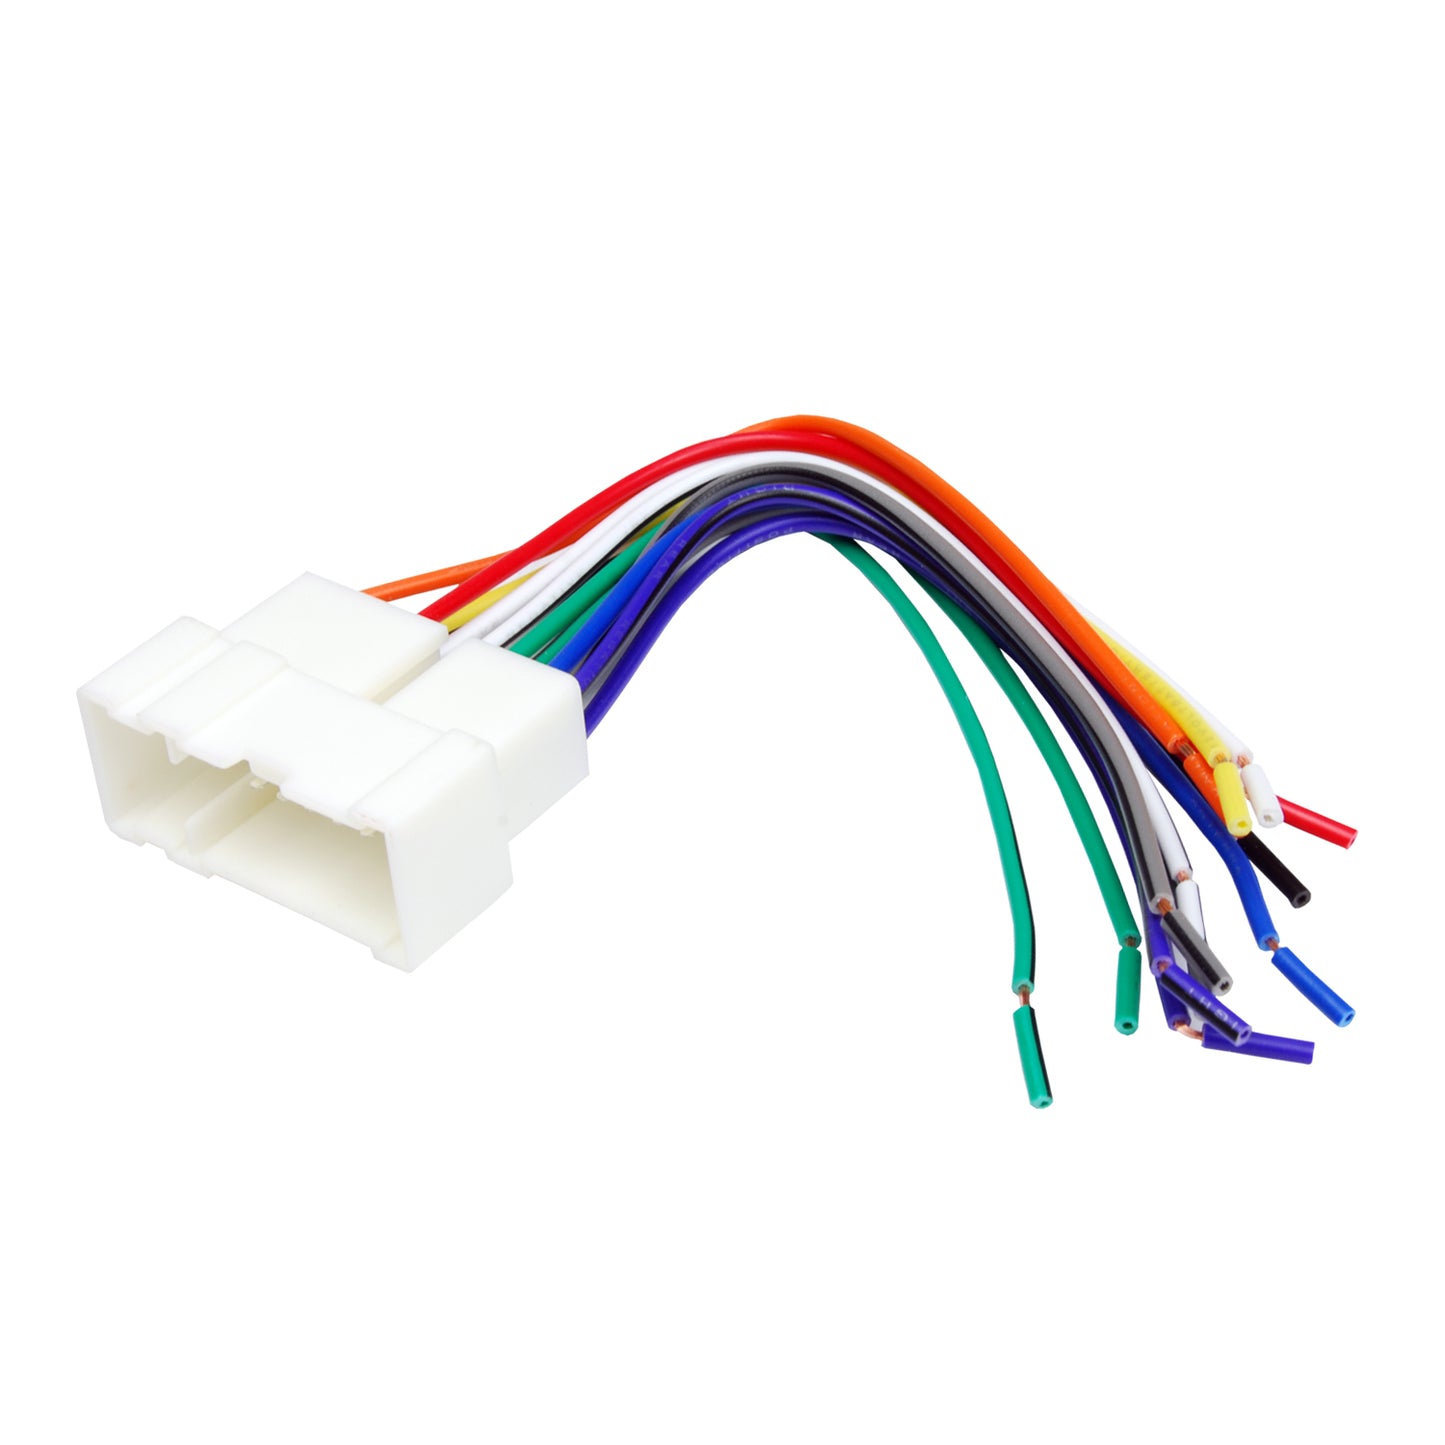 WH-NIS 0210 - Wiring Harness for Nissan